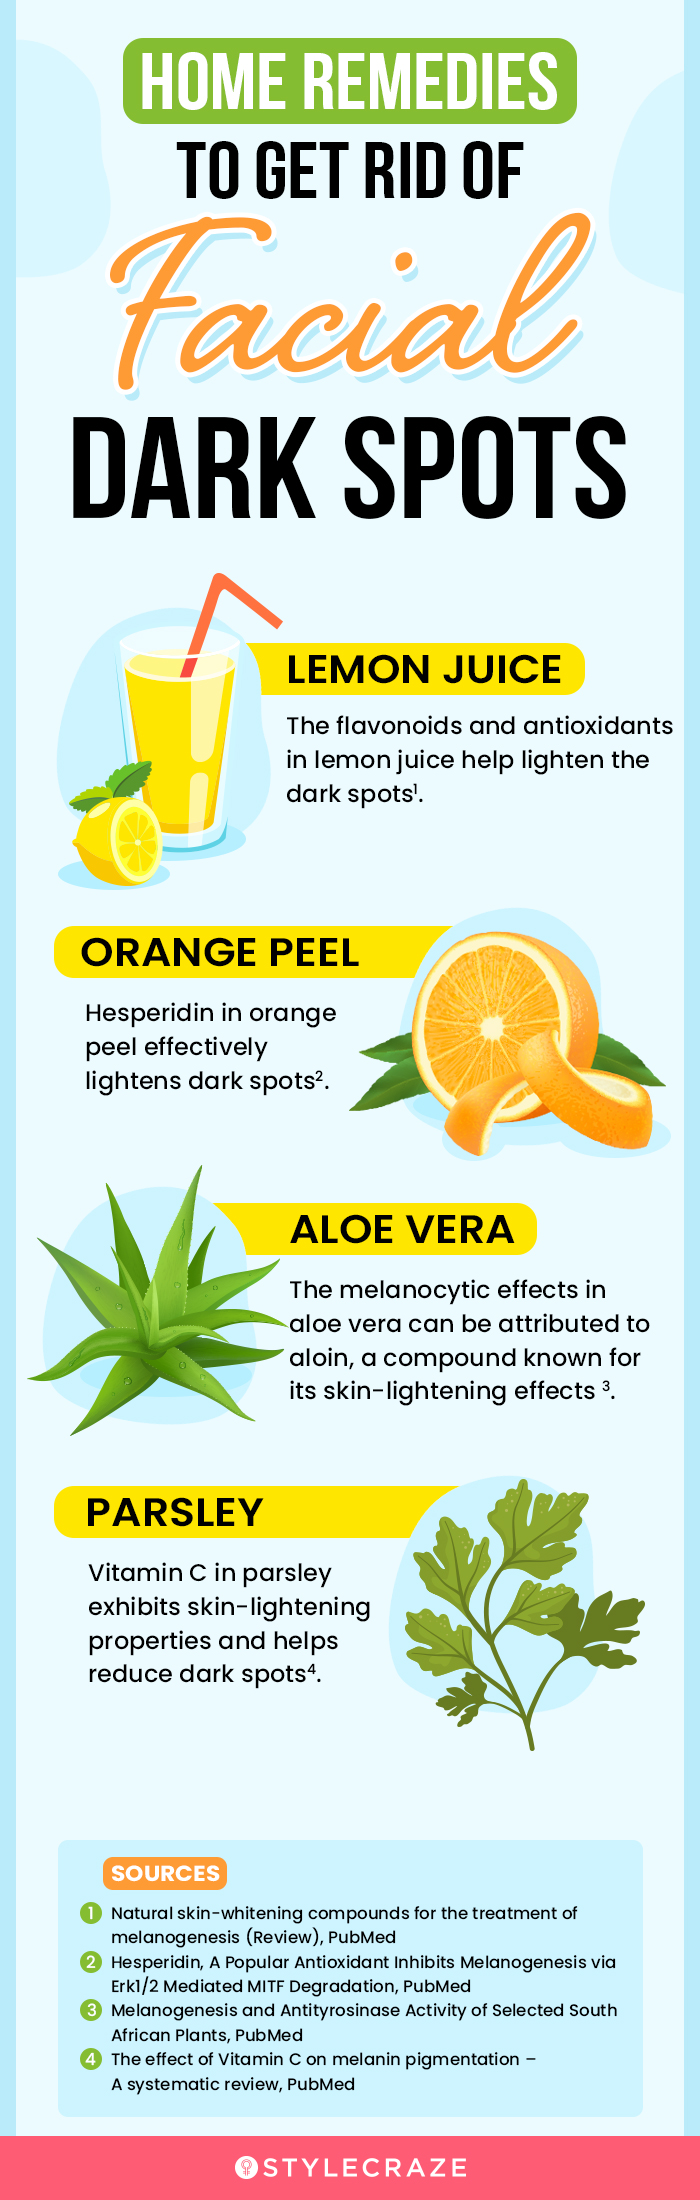 home remedies to get rid of facial dark spots [infographic]